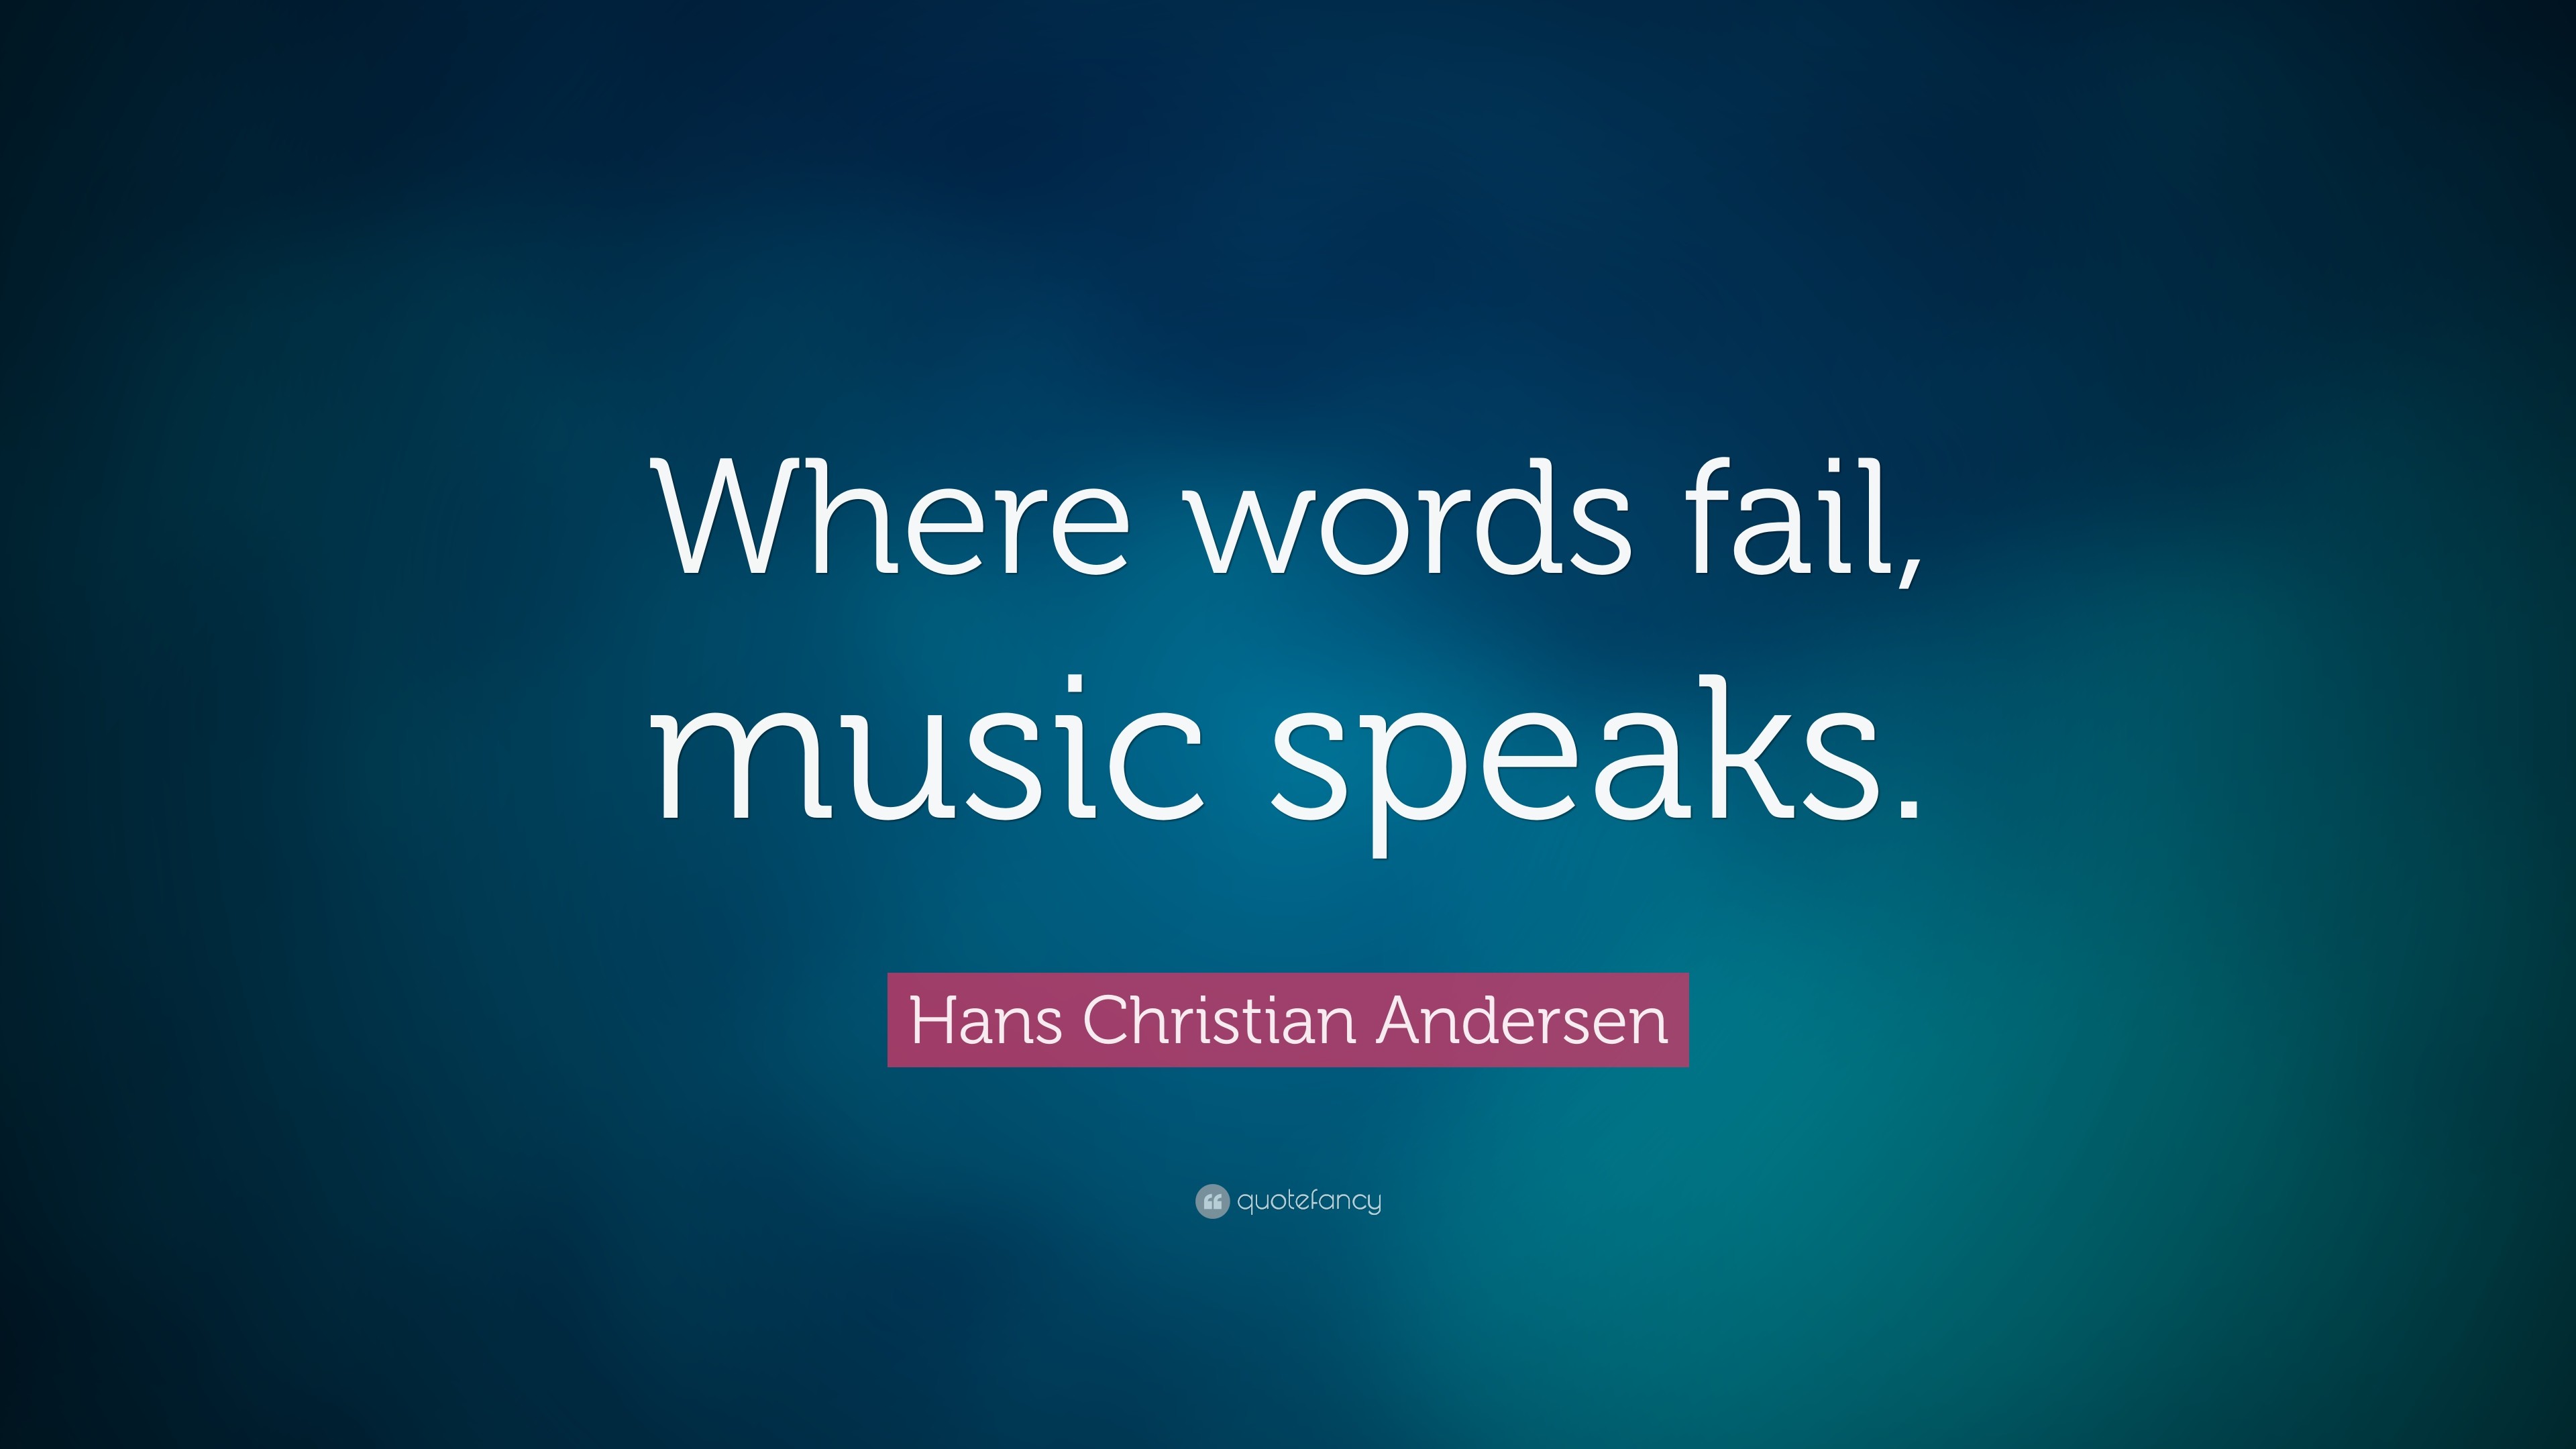 3840x2160 Hans Christian Andersen Quote: “Where words fail, music speaks.”